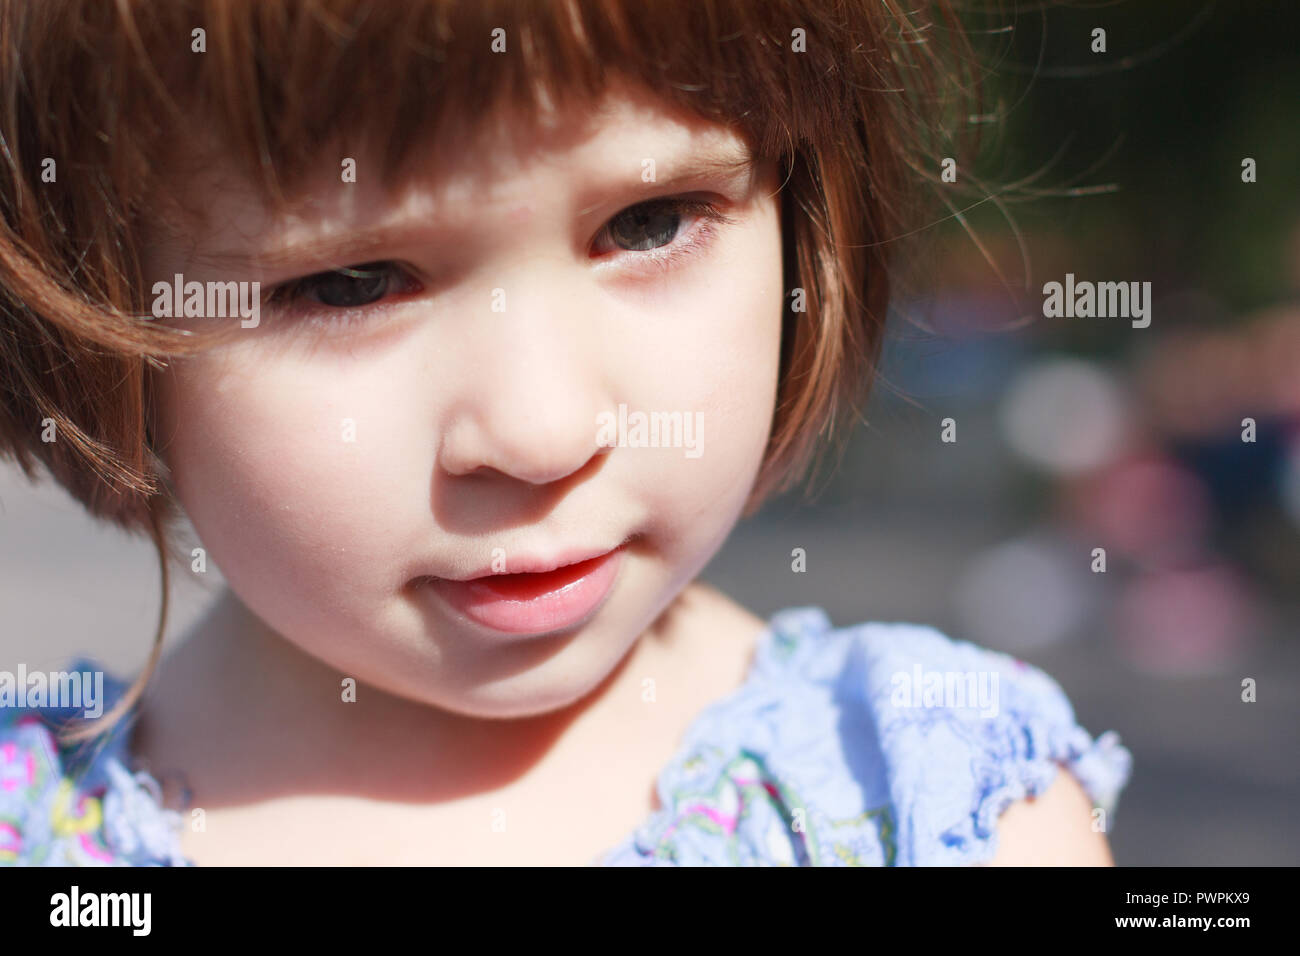 close up portrait of young curious child with short hair, wearing a blue dress Stock Photo